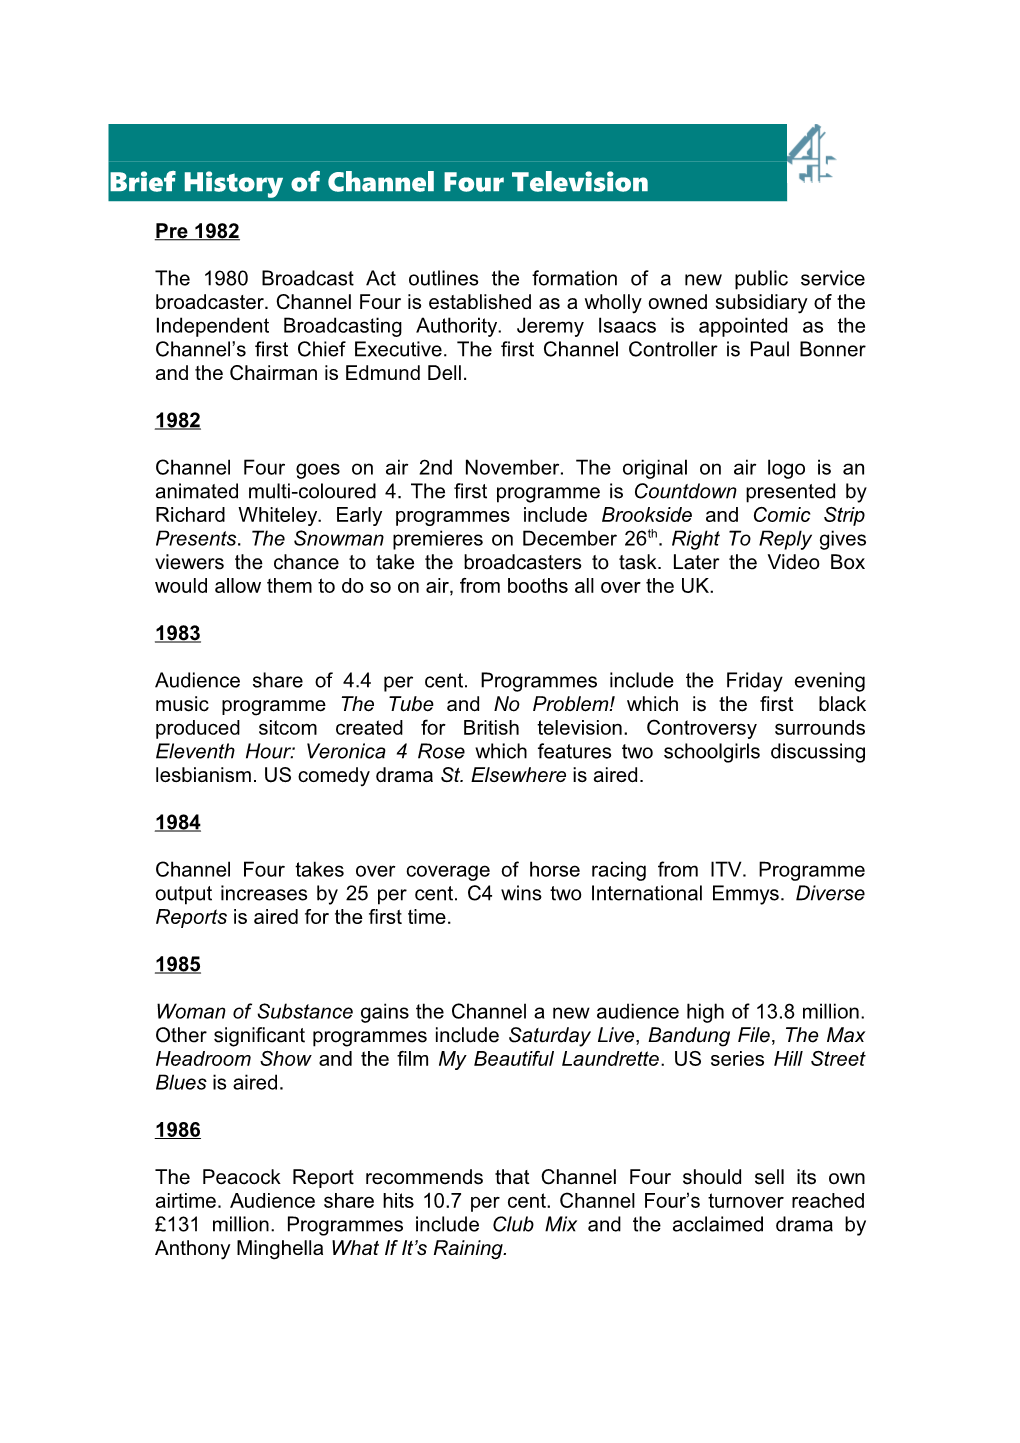 Brief History of Channel Four Televison Coporation